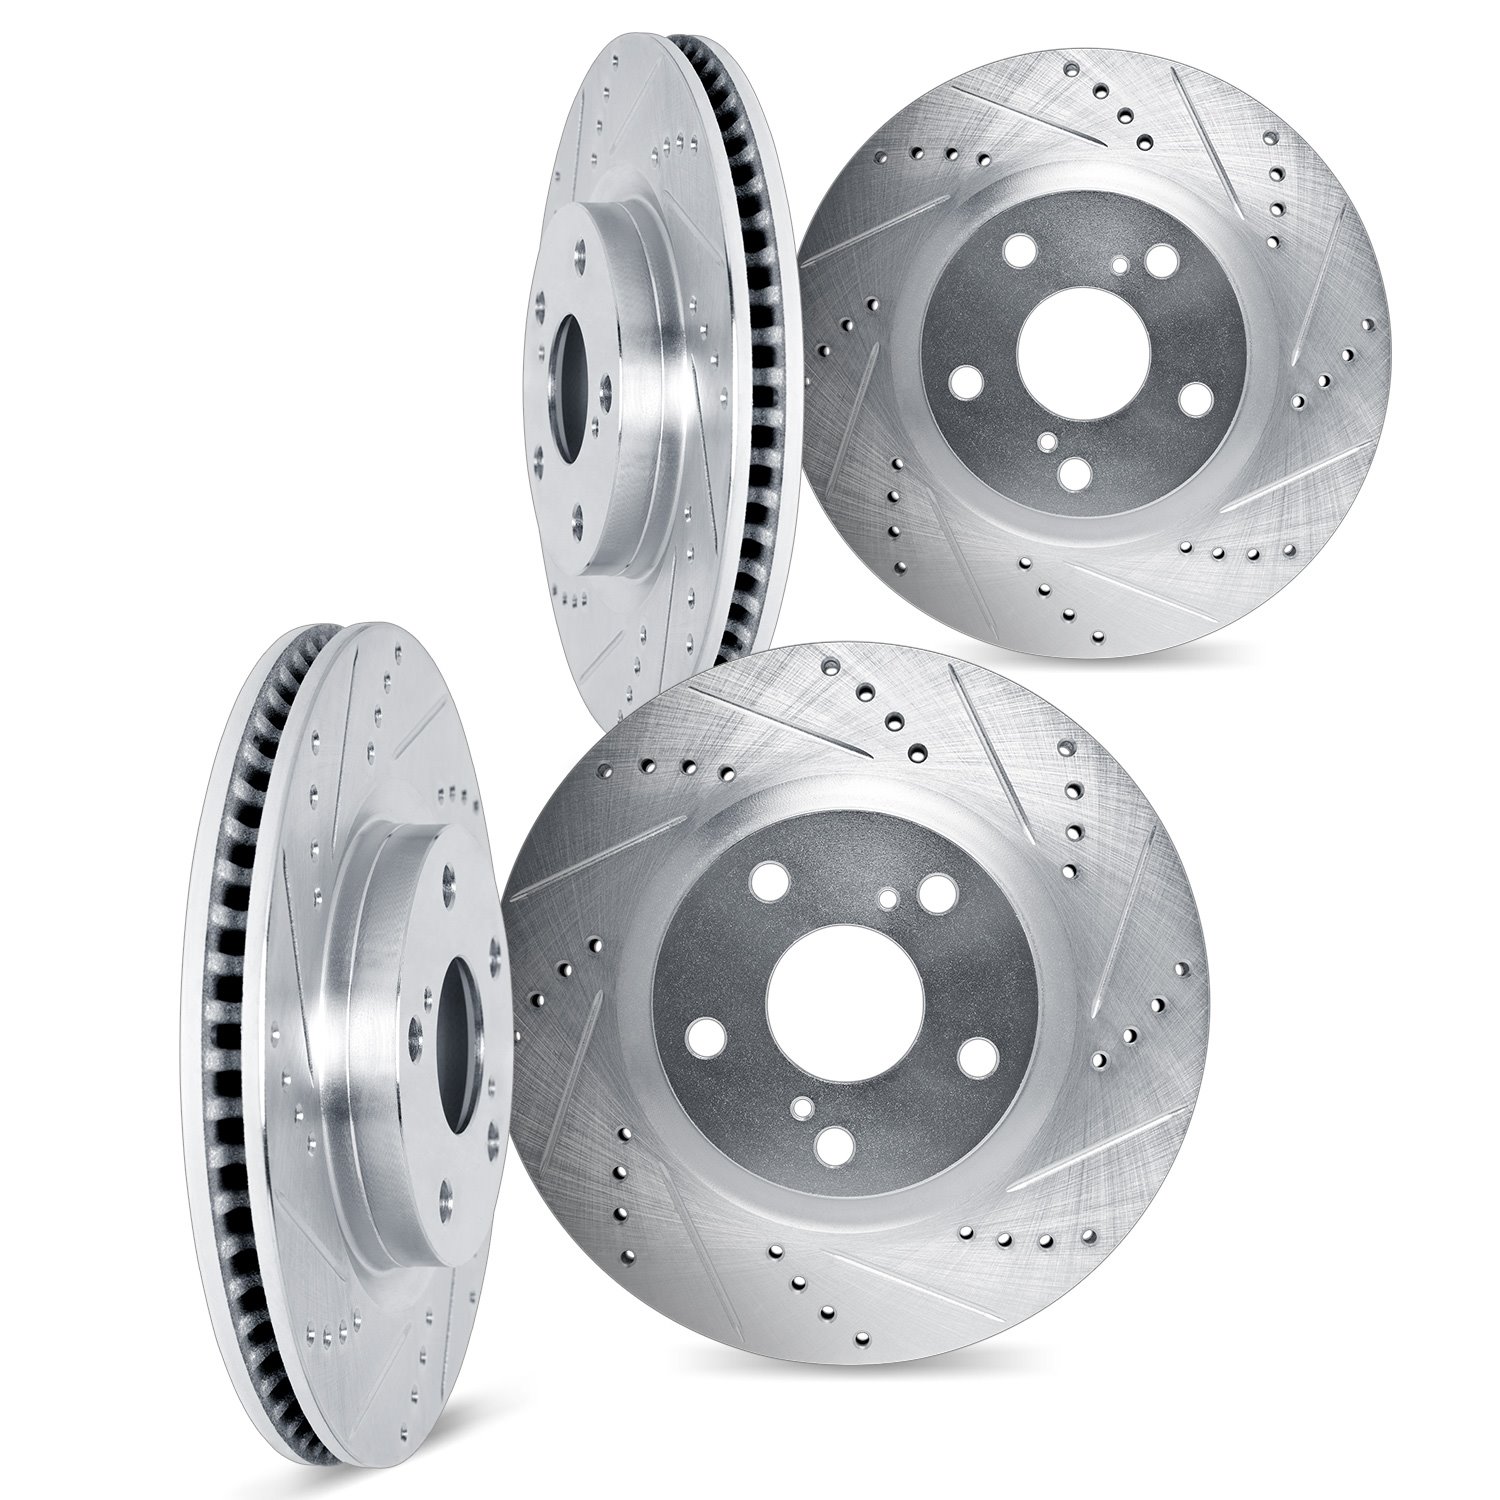 7004-13028 Drilled/Slotted Brake Rotors [Silver], Fits Select Subaru, Position: Front and Rear